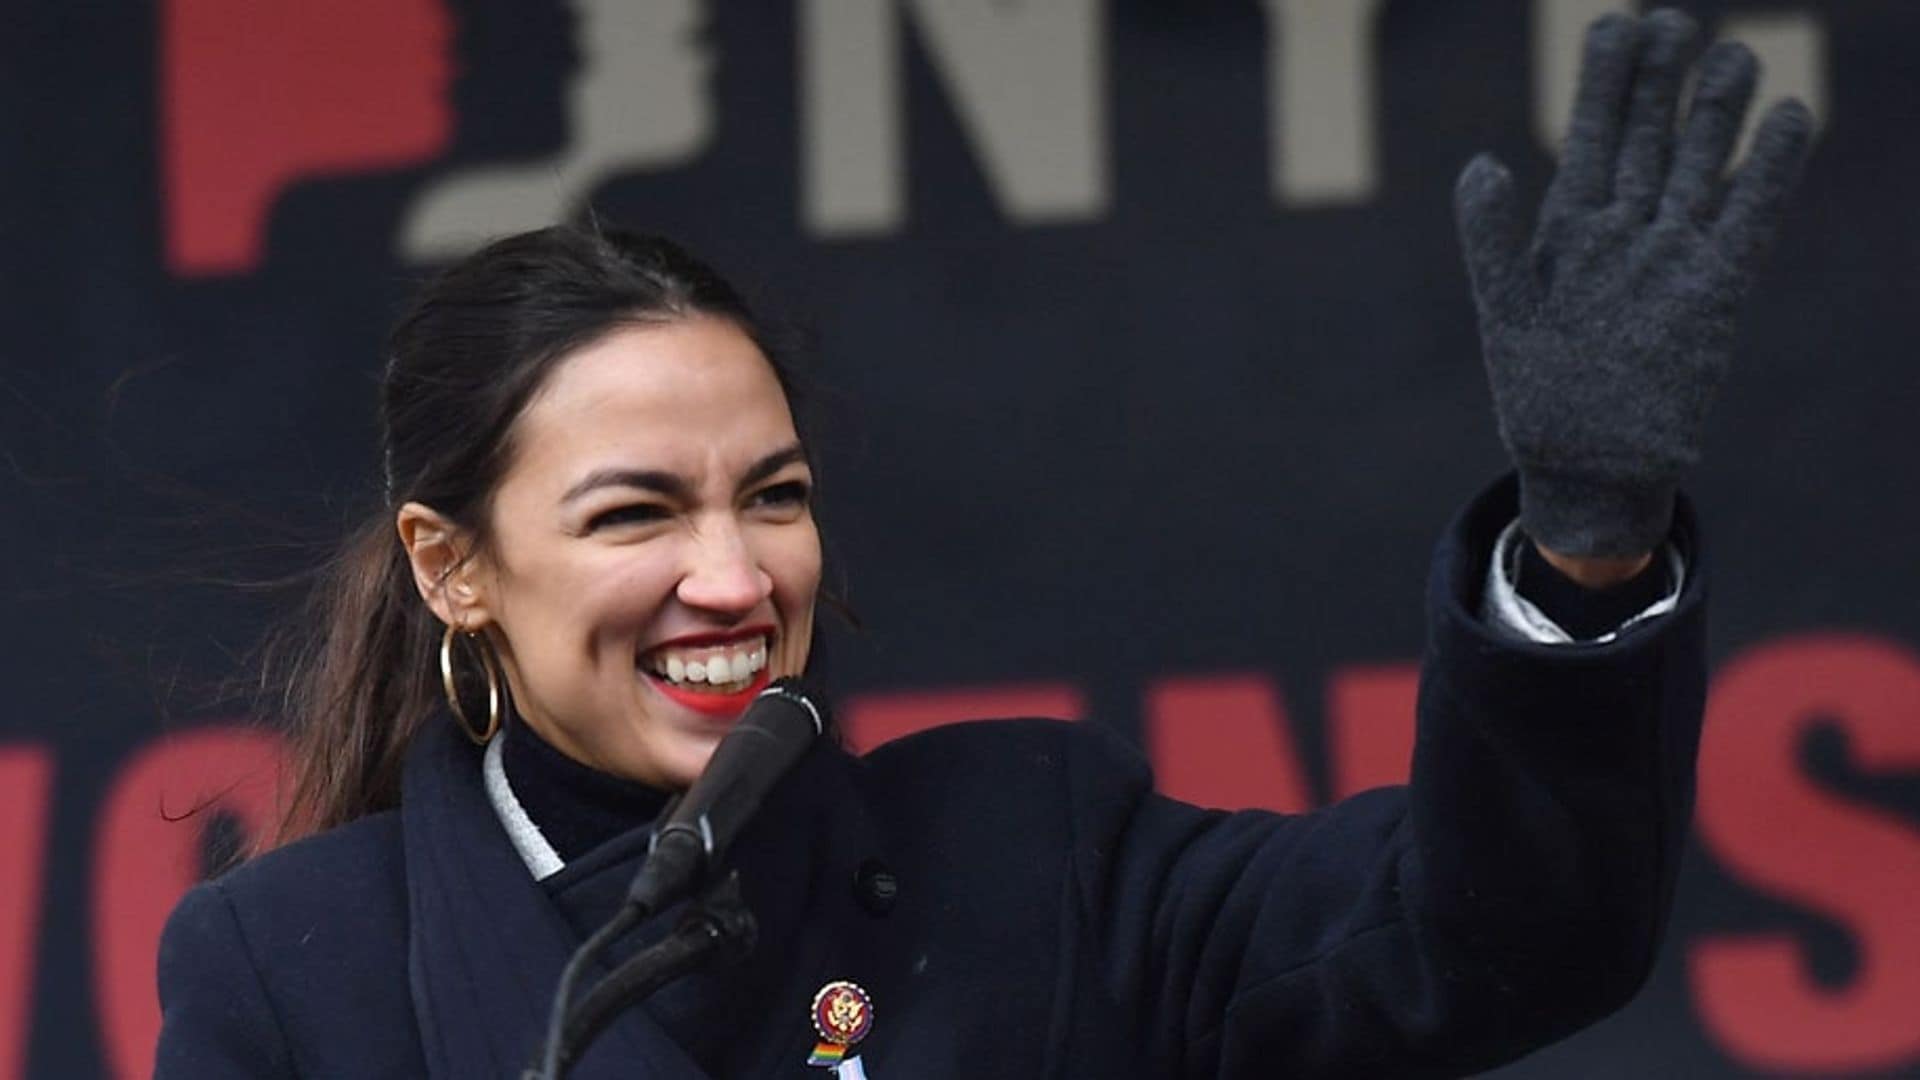 Alexandria Ocasio-Cortez makes appearance at Sundance Film Festival – see what she had to say!